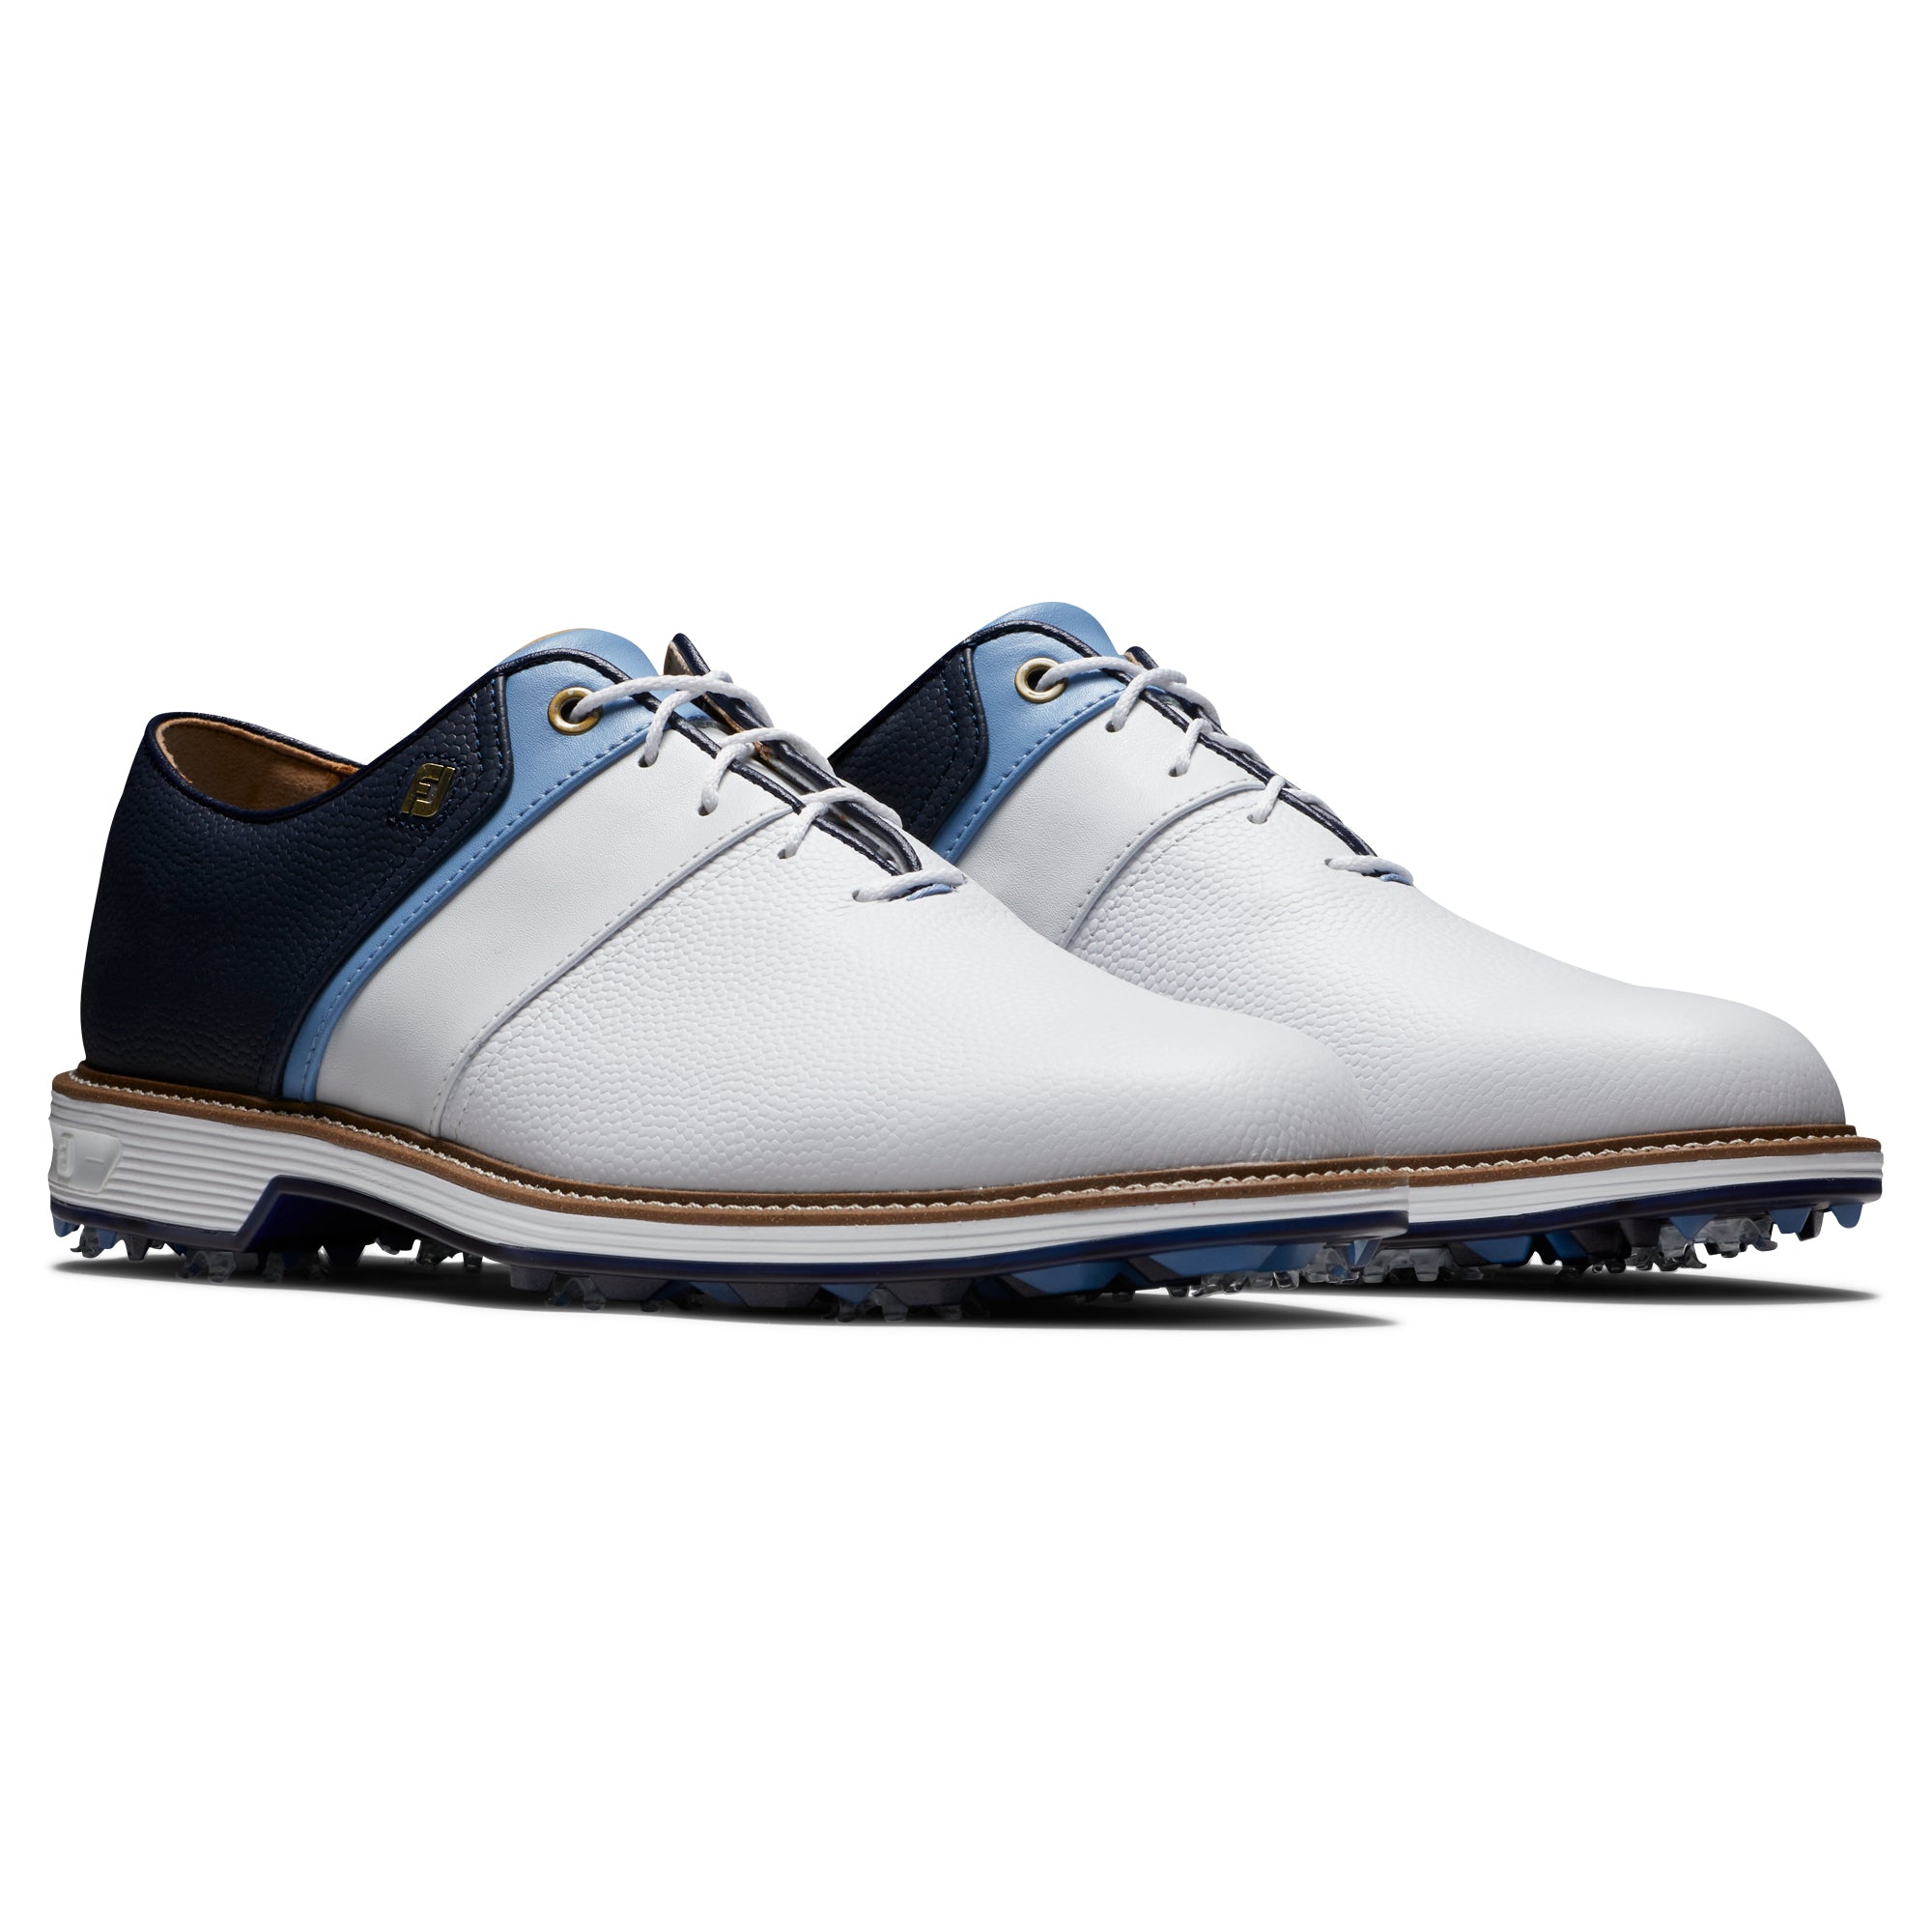 footjoy-premiere-series-packard-golf-shoes-54398-white-blue-navy